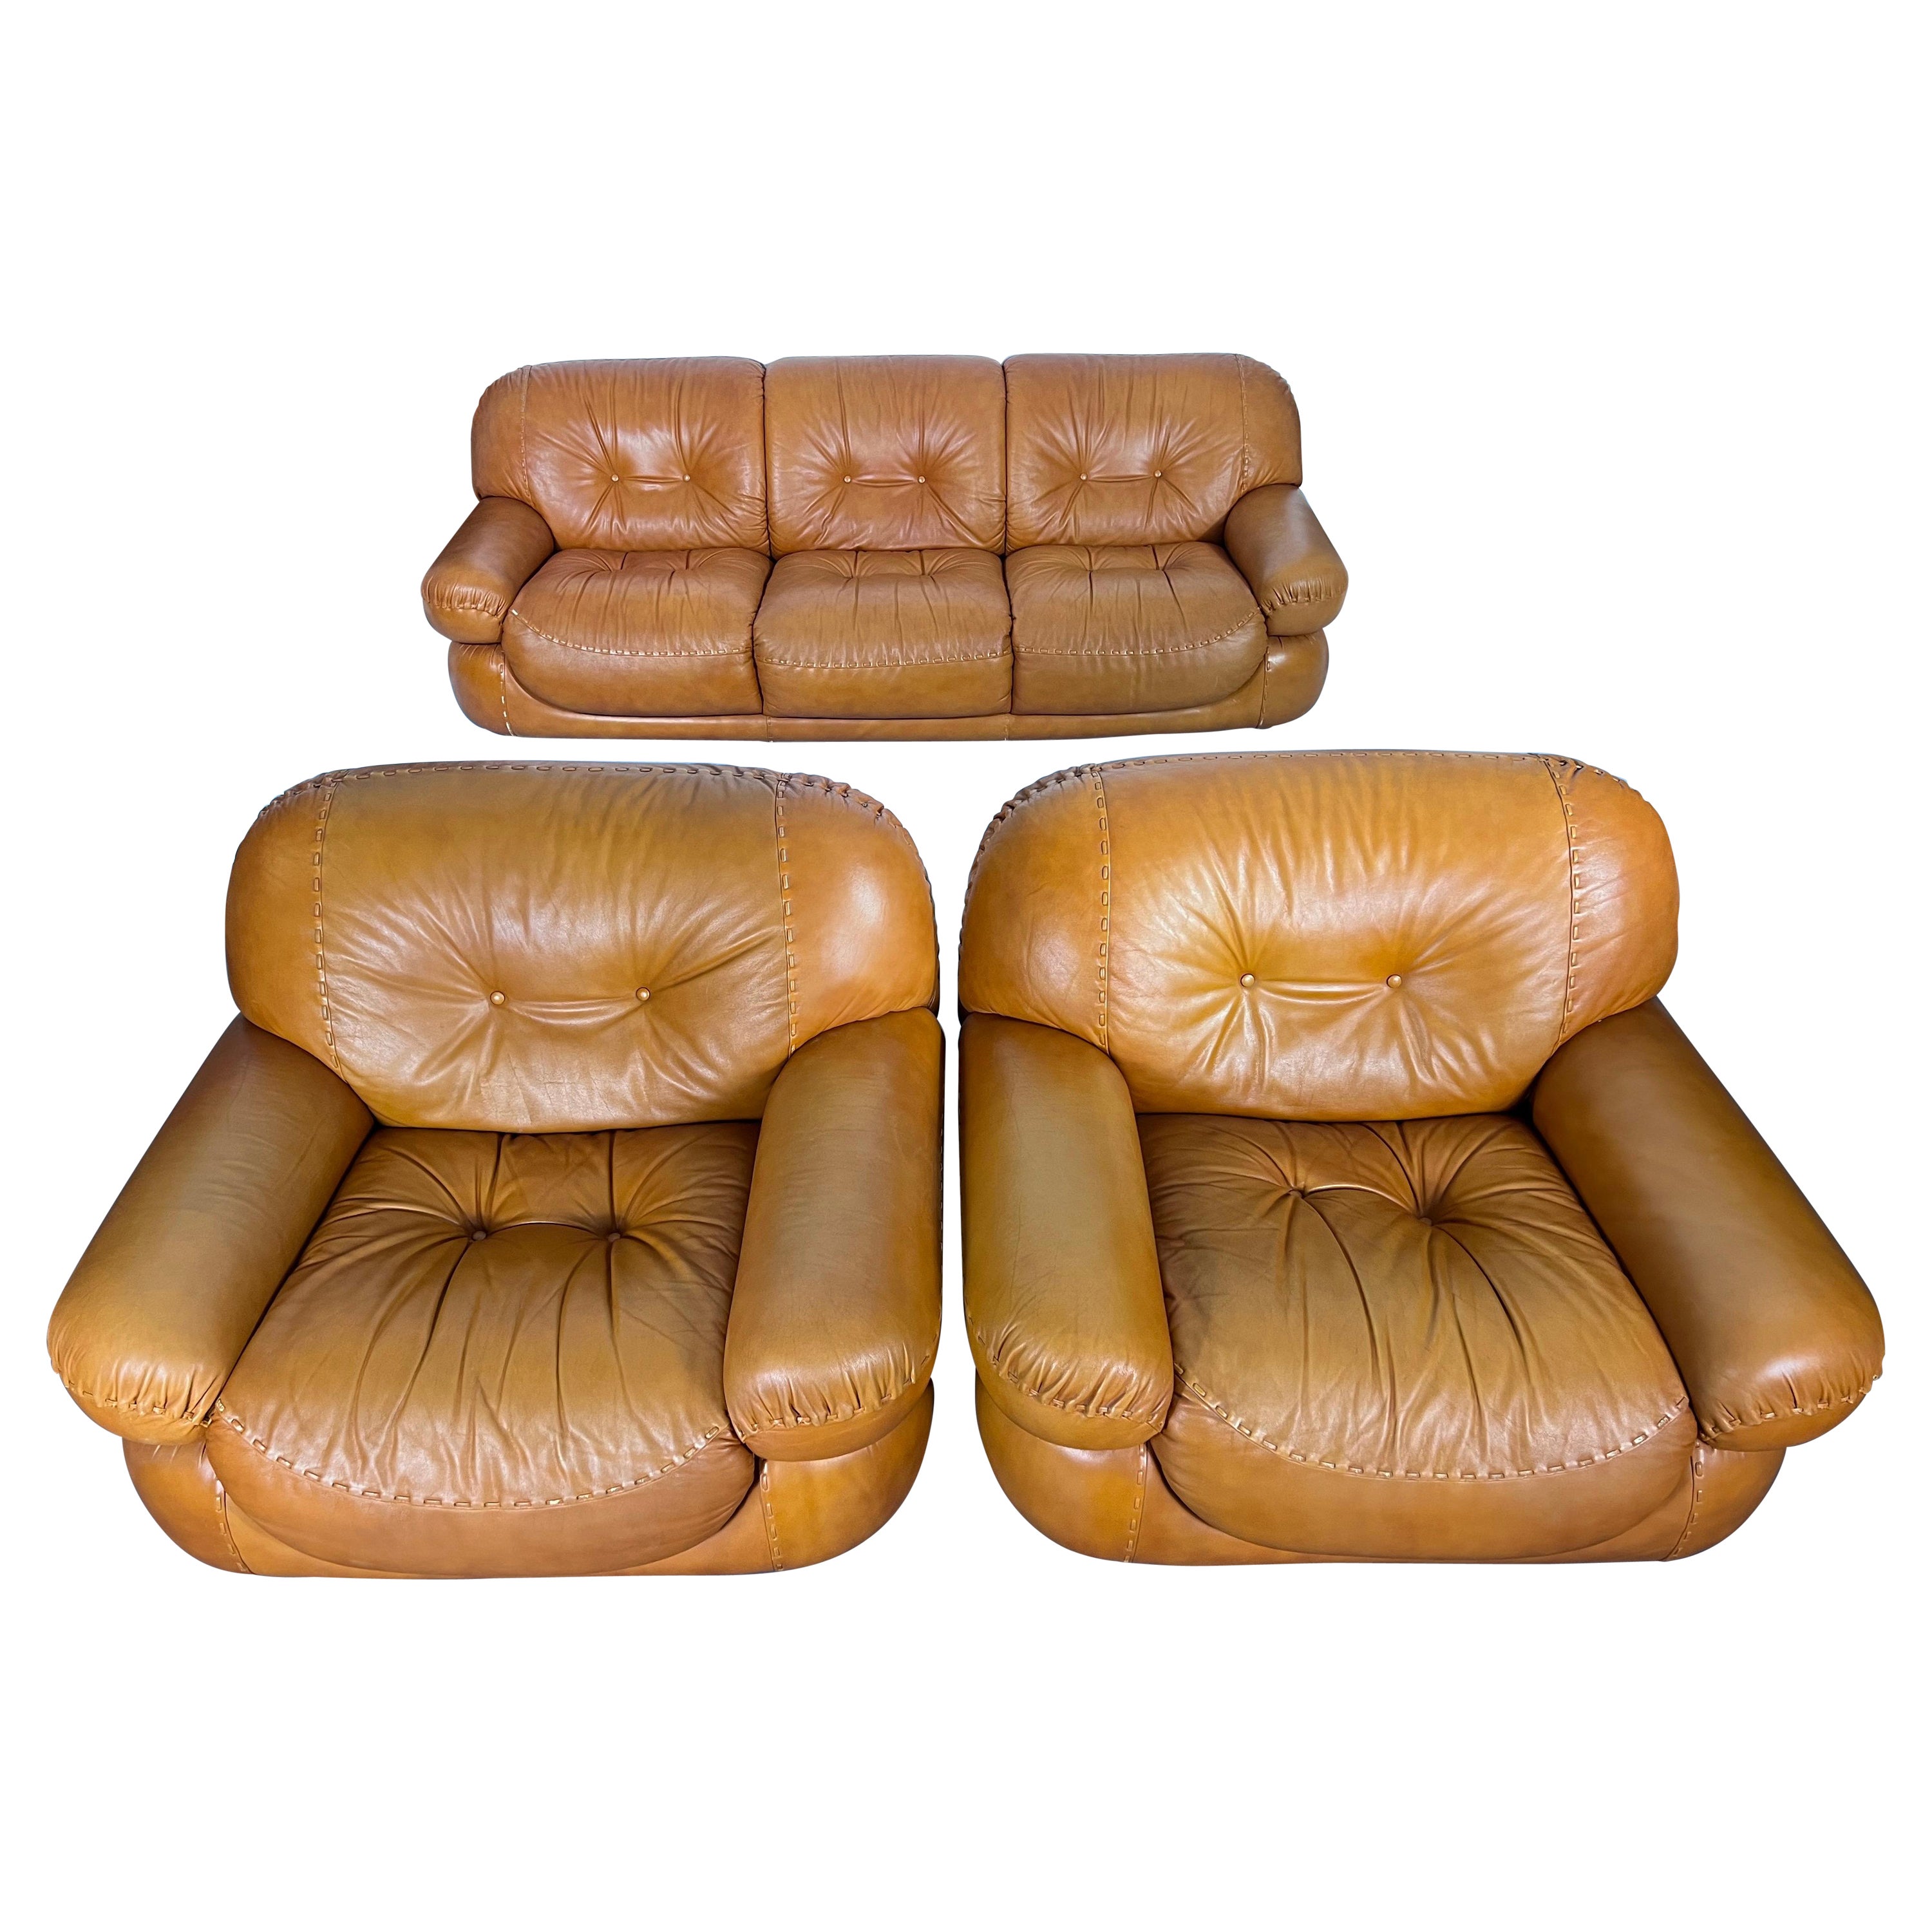 Vintage Sofa Set in Cognac Leather by Sapporo for Mobil Girgi, Italy, 1970s For Sale